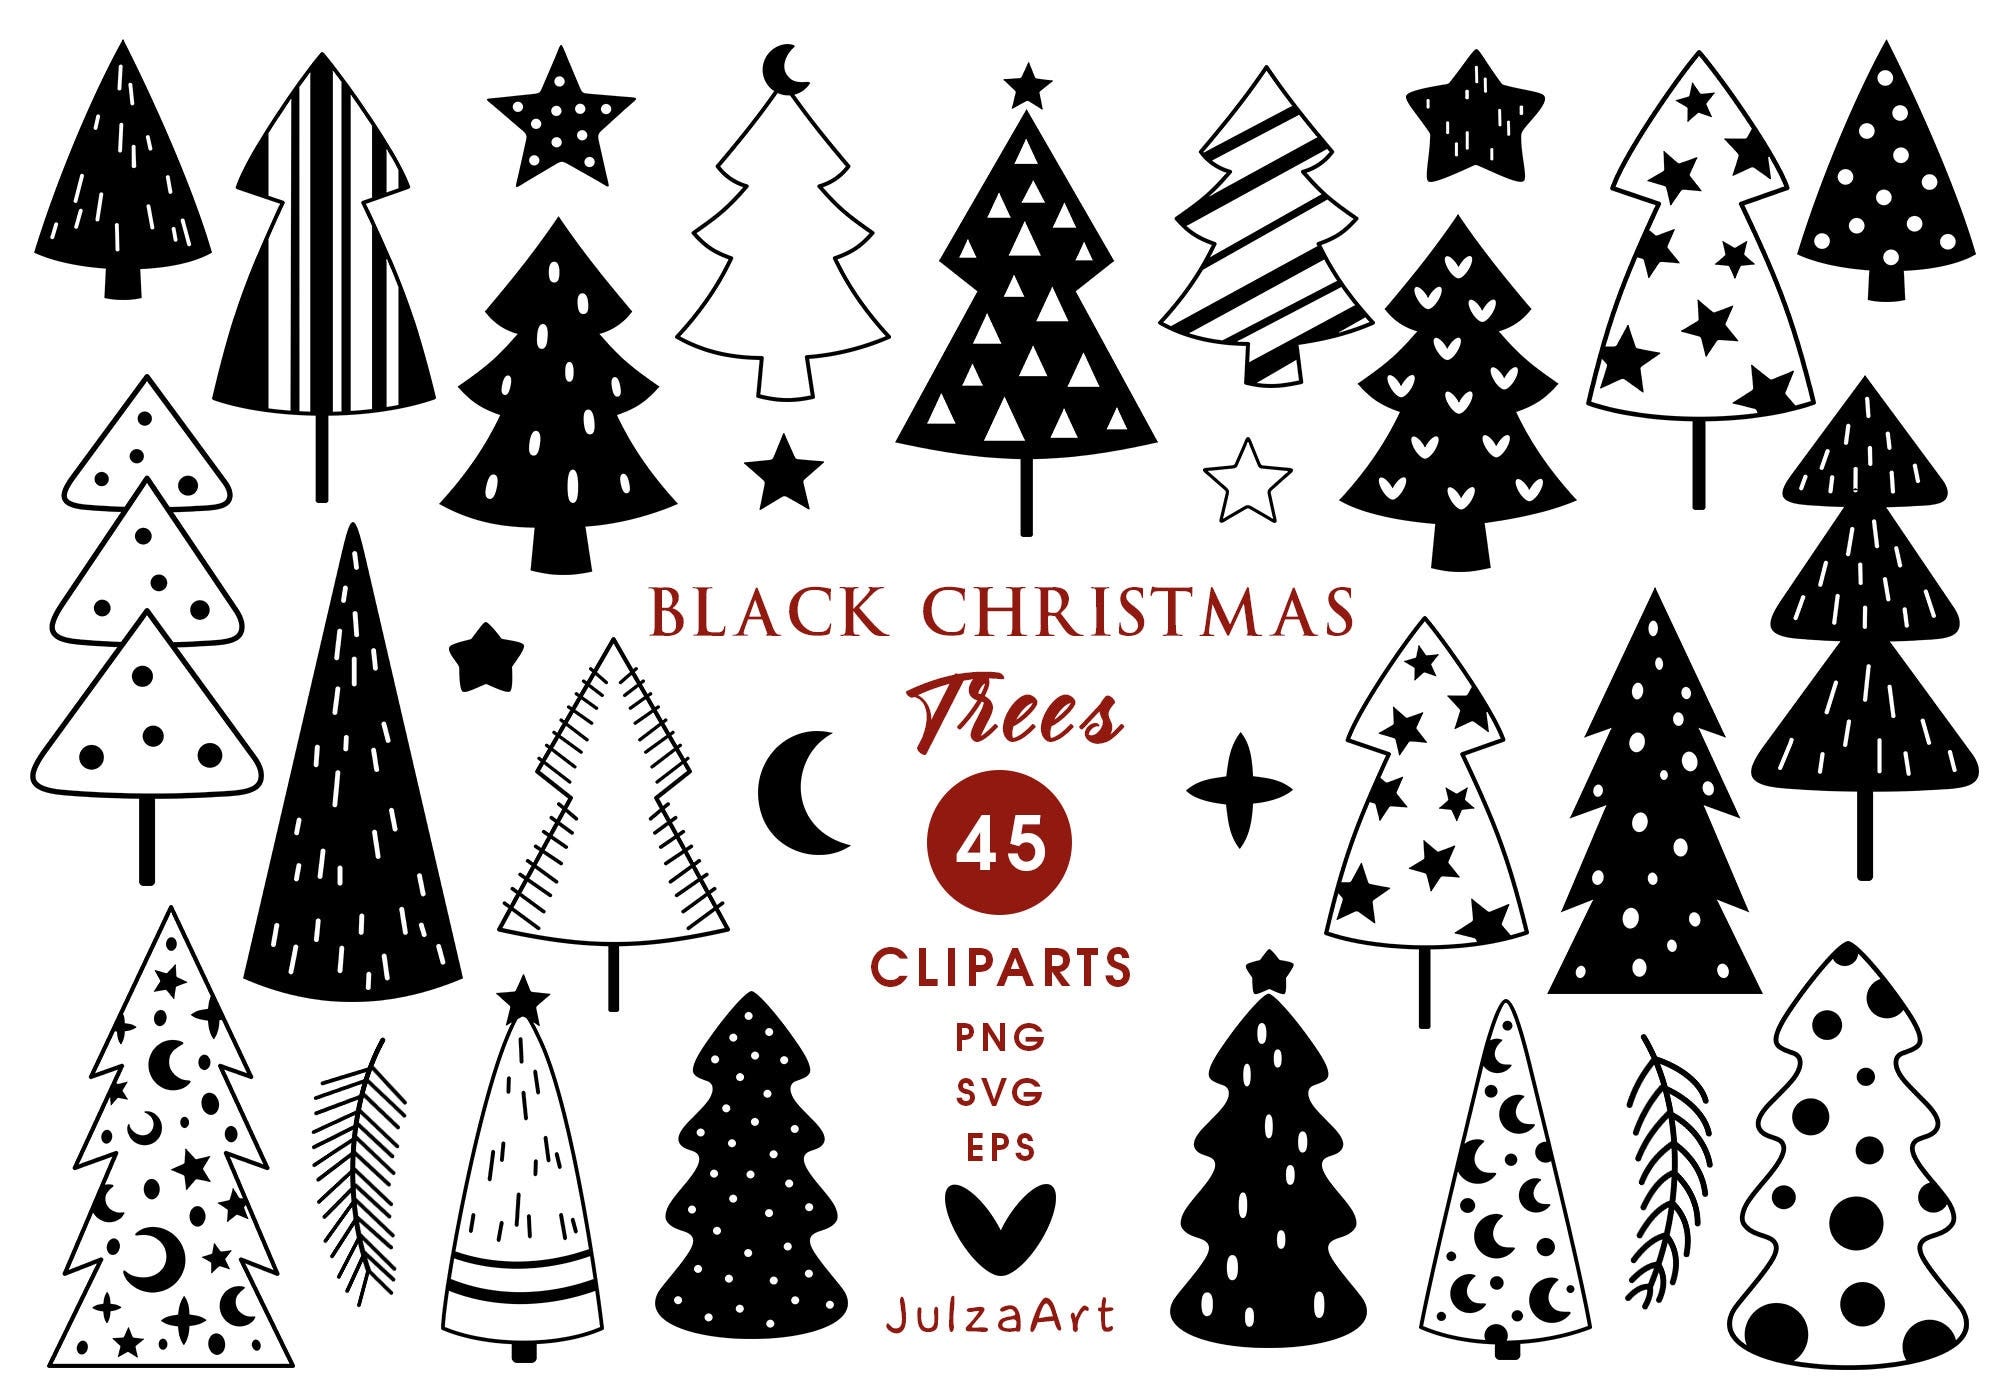 Christmas tree clipart, Black christmas trees svg, Scandinavian New year trees png, Happy holiday print, Digital download, Commercial use